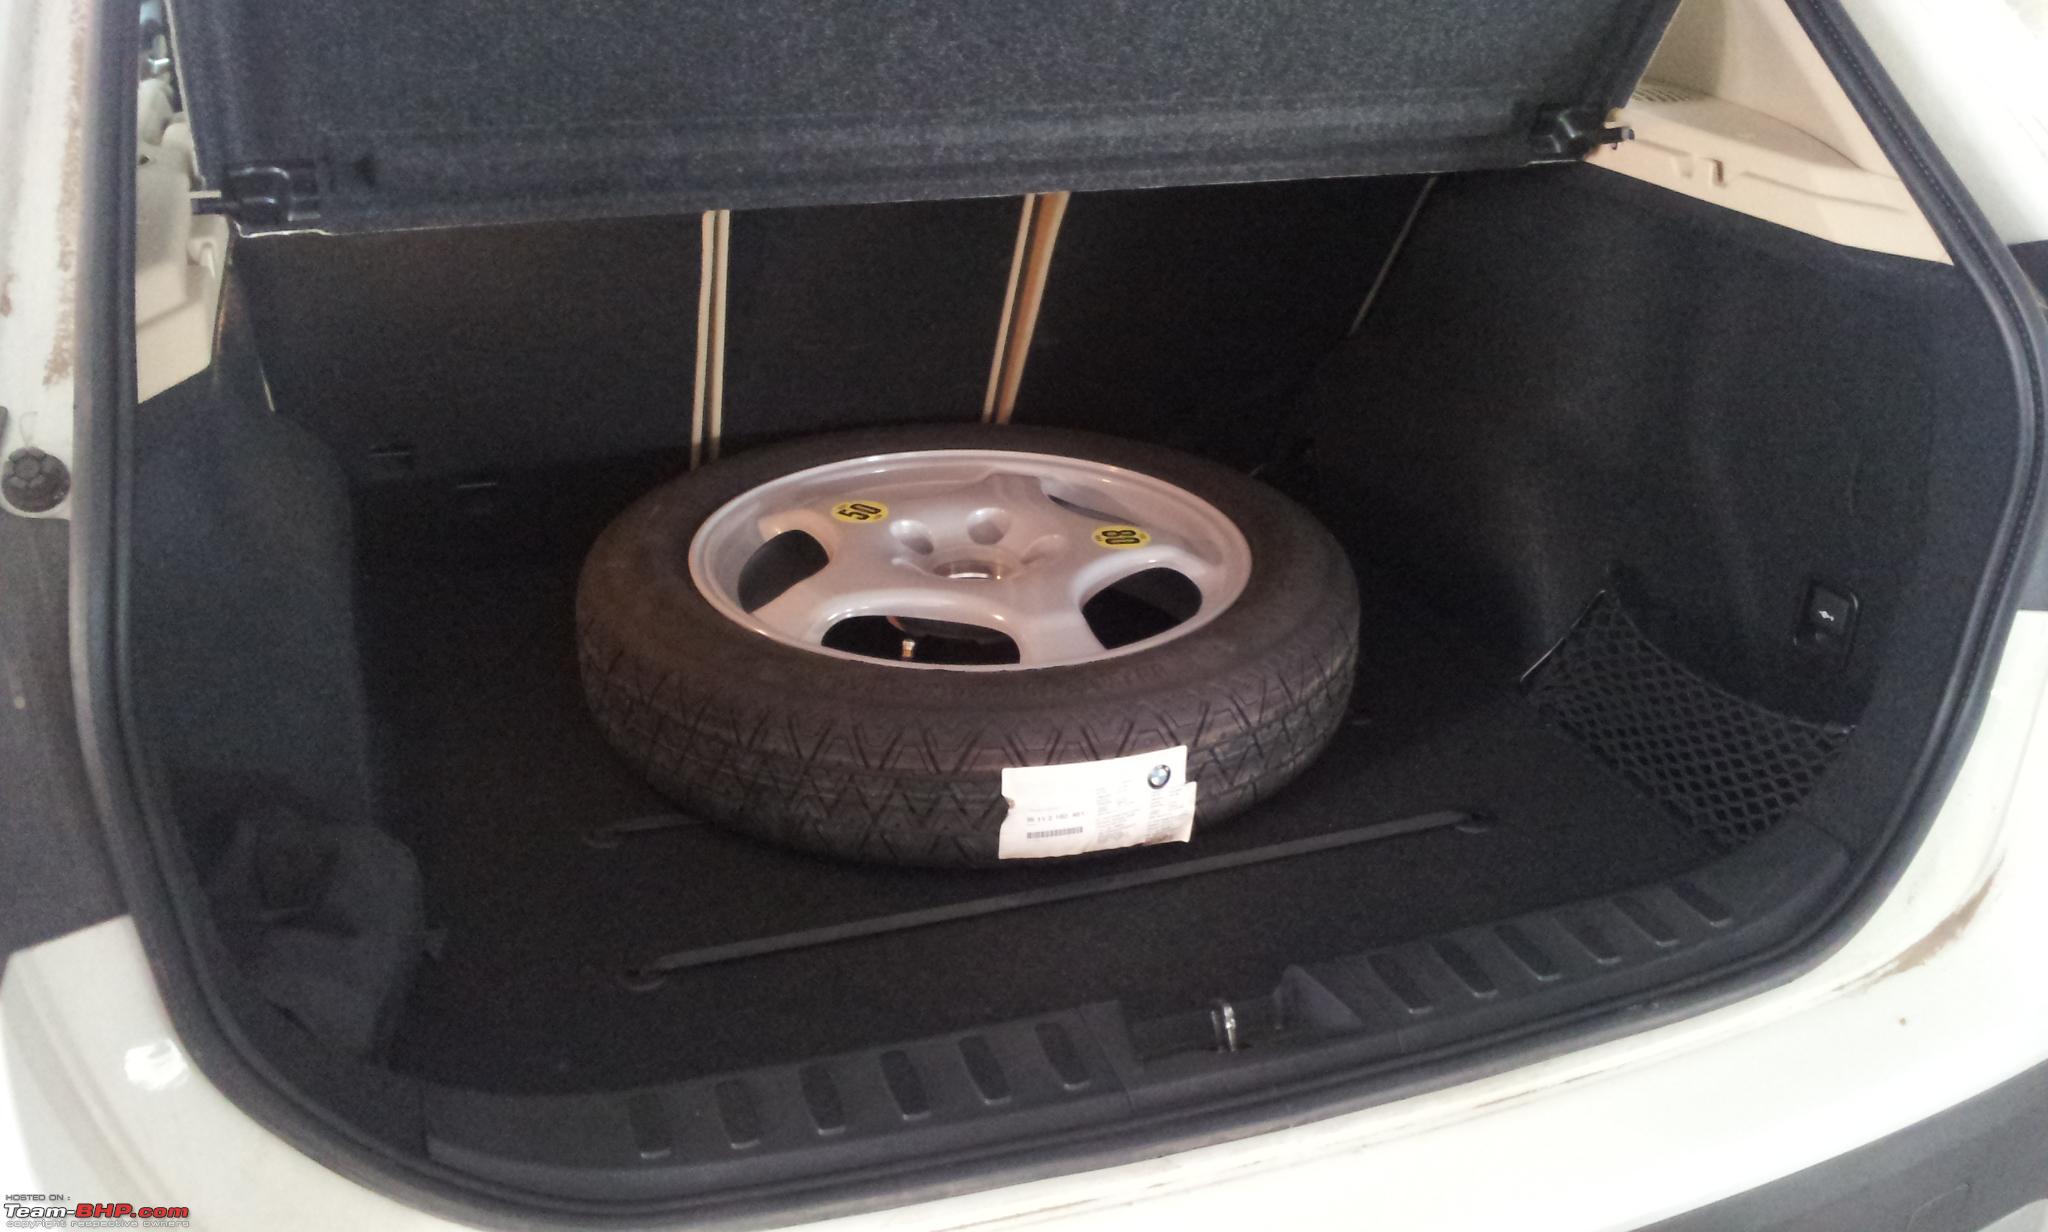 Space Saver Spare Tyre for the BMW X1 - Team-BHP